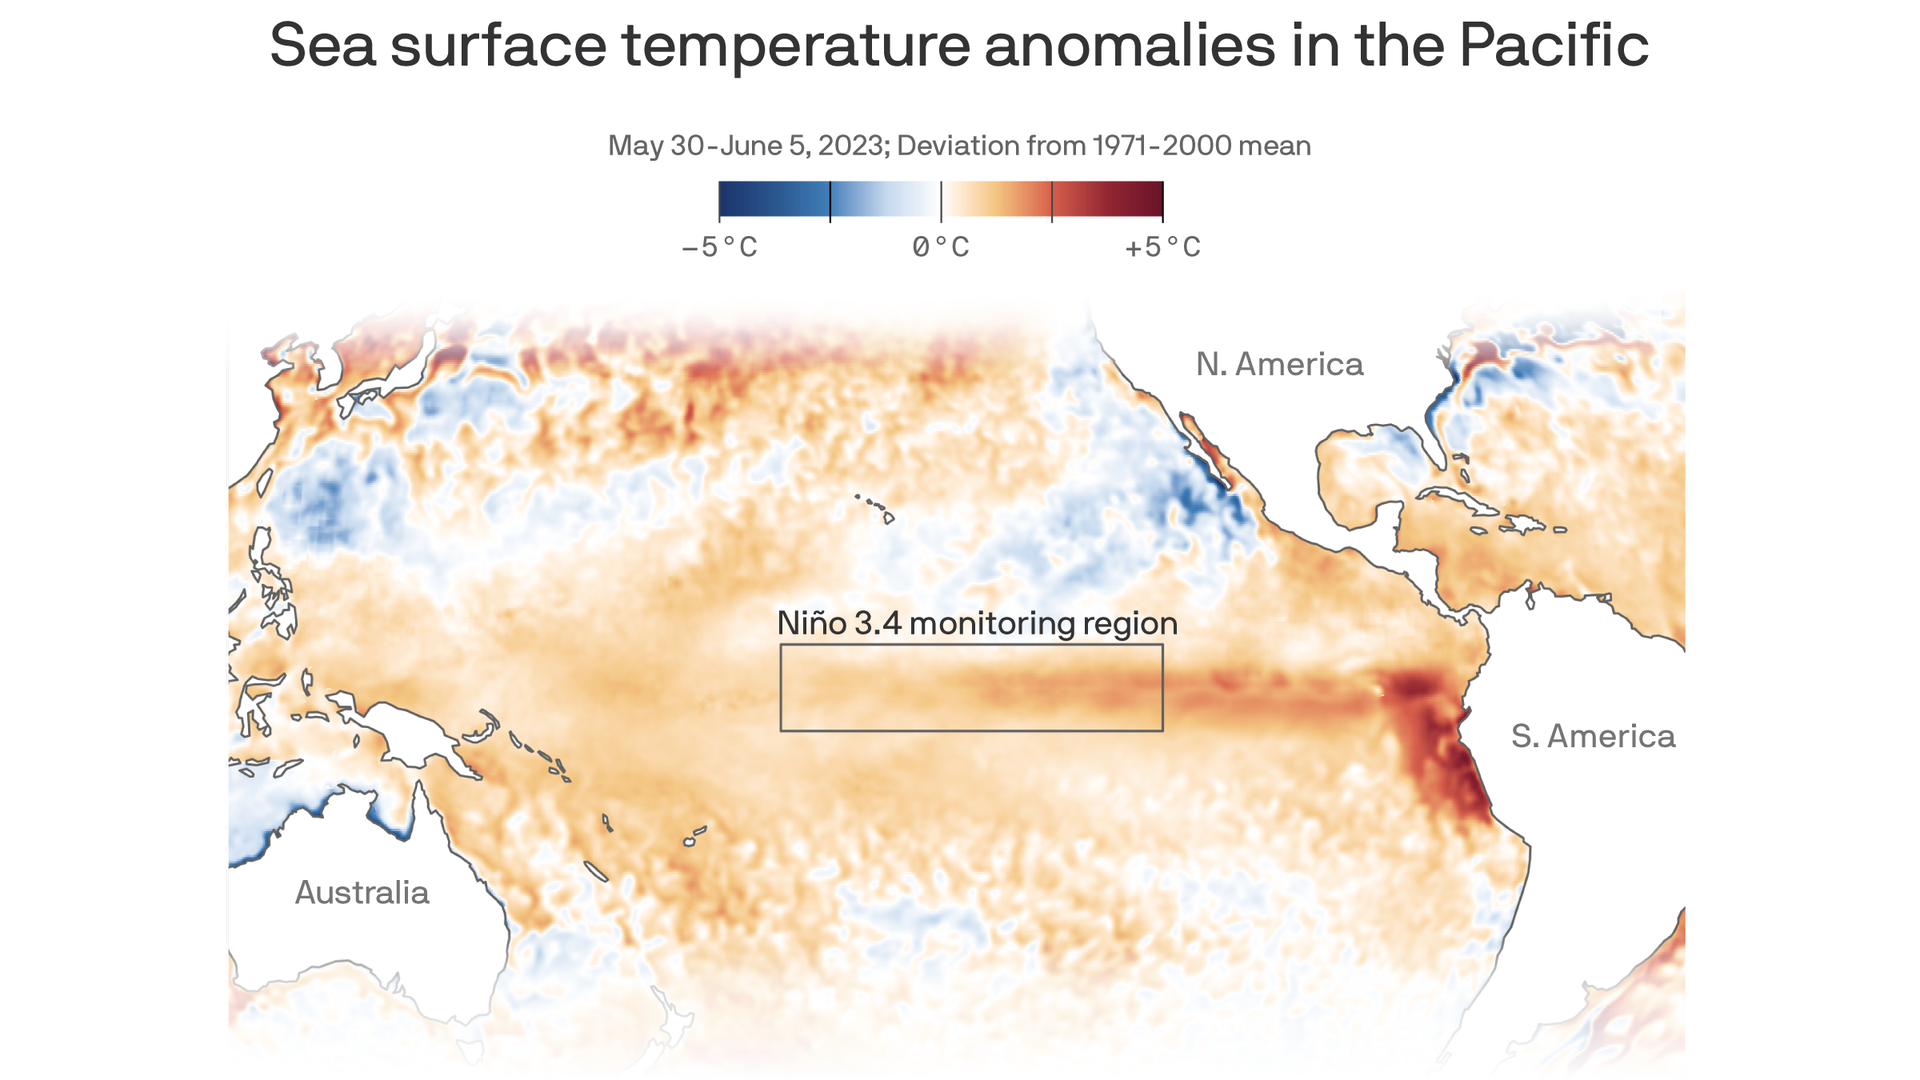 A map showing sea surface temperature anomalies in the equatorial Pacific Ocean.